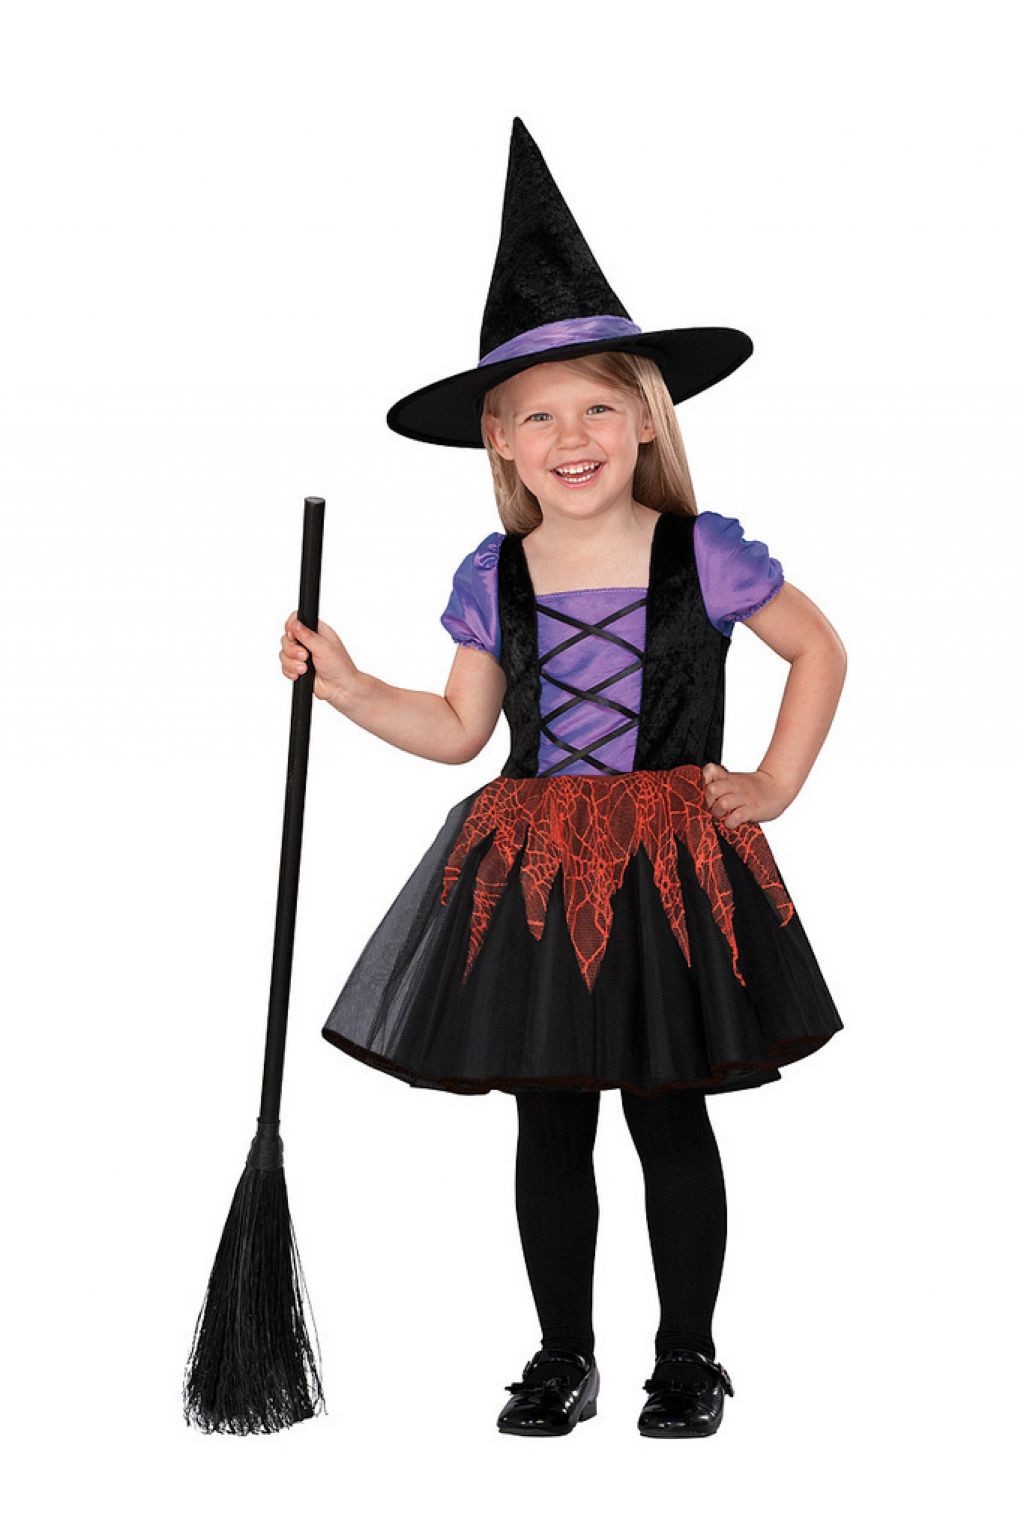 Unique And Creative Kids Halloween Costumes.